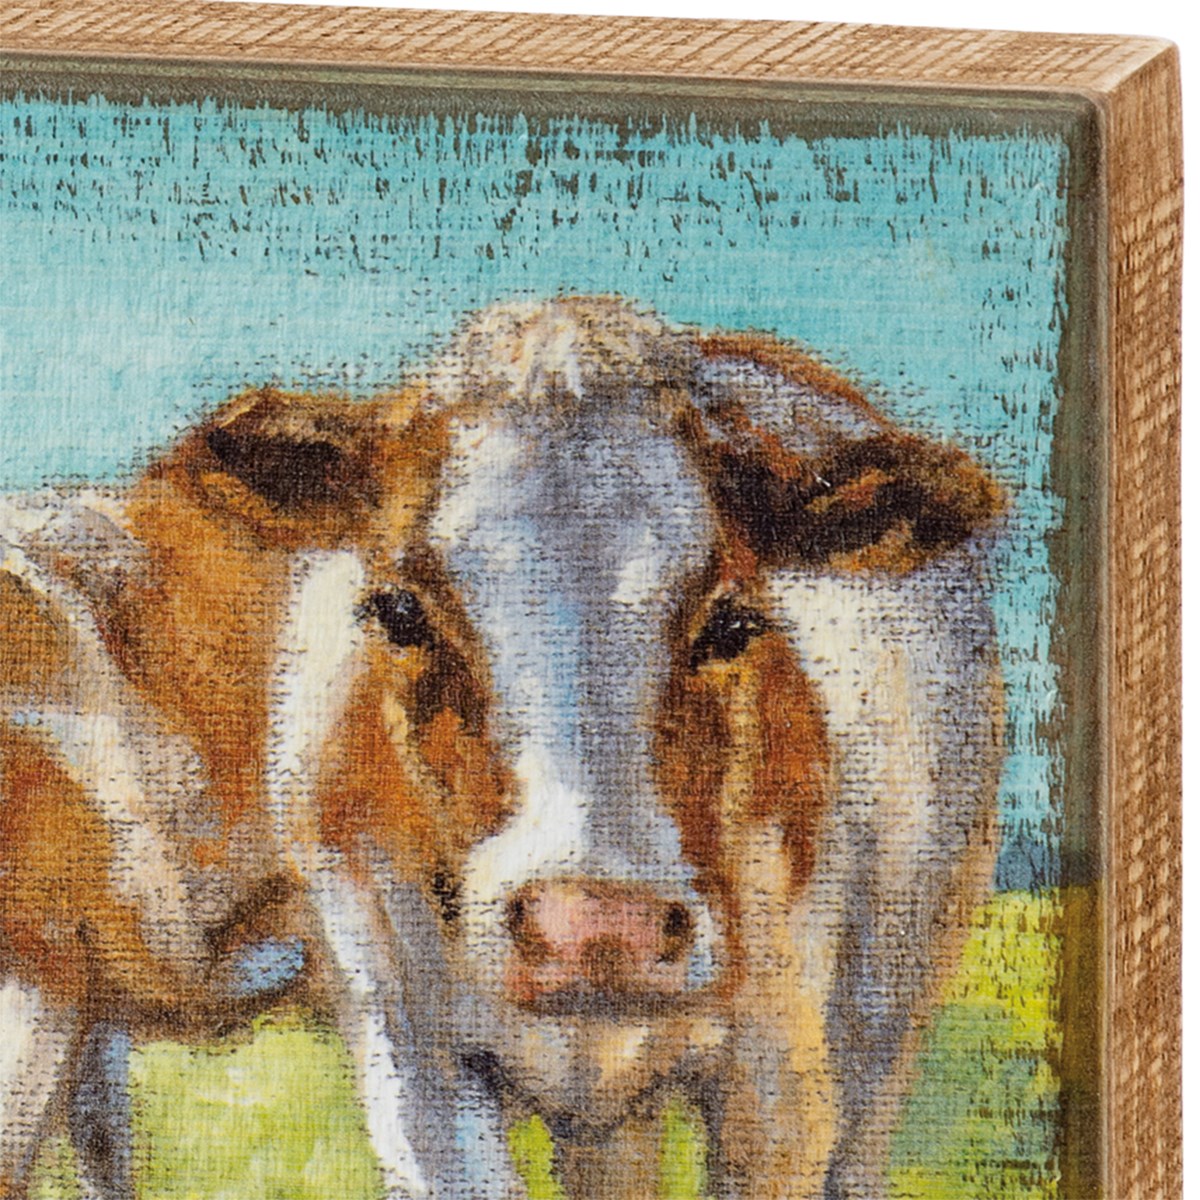 Cow Rows Box Sign - Wood